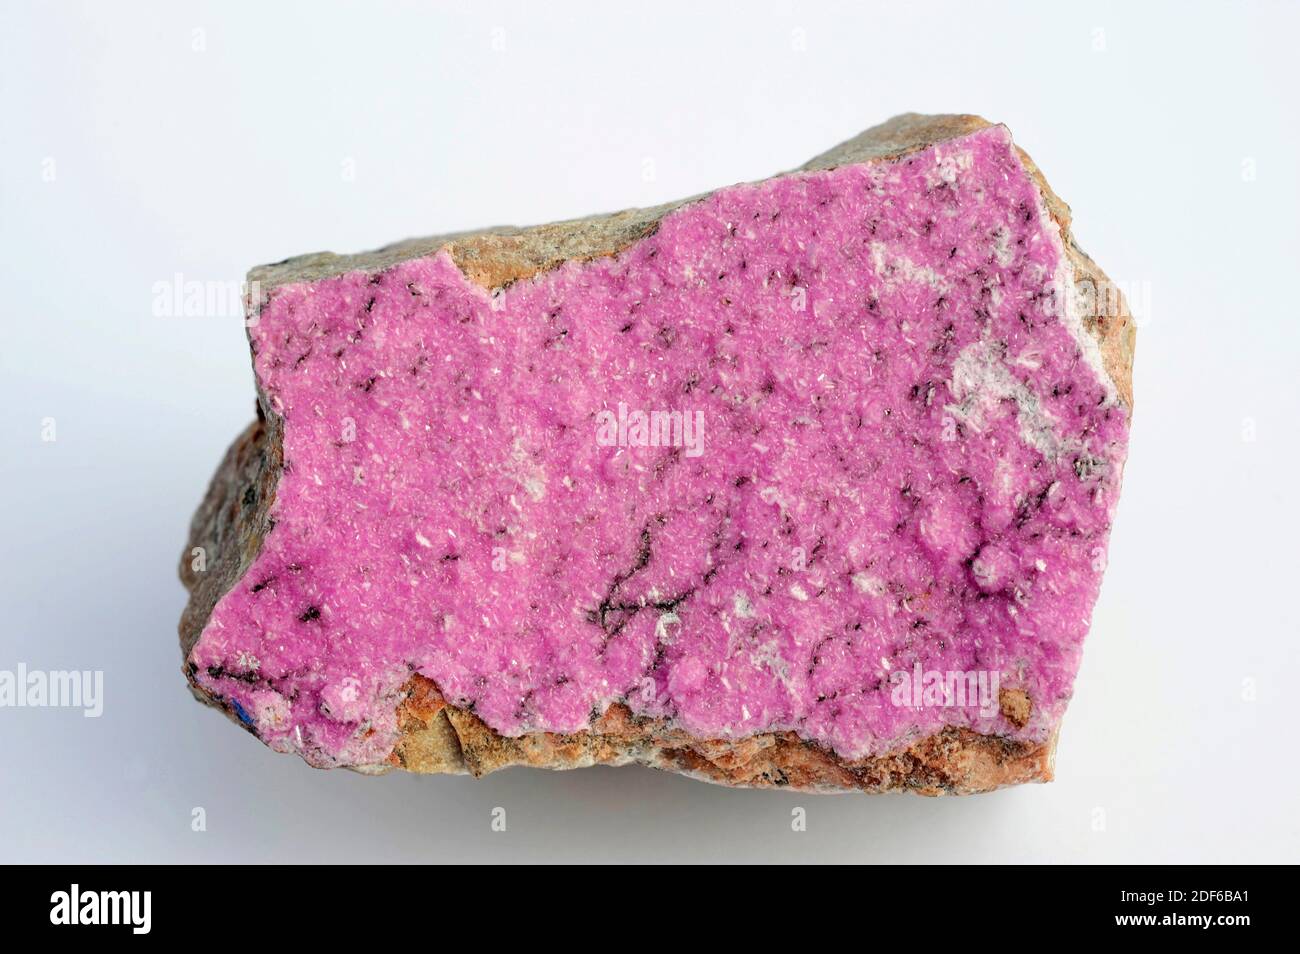 Cobalt calcite is a mineral composed of calcium carbonate with cobalt. This sample comes from China. Stock Photo